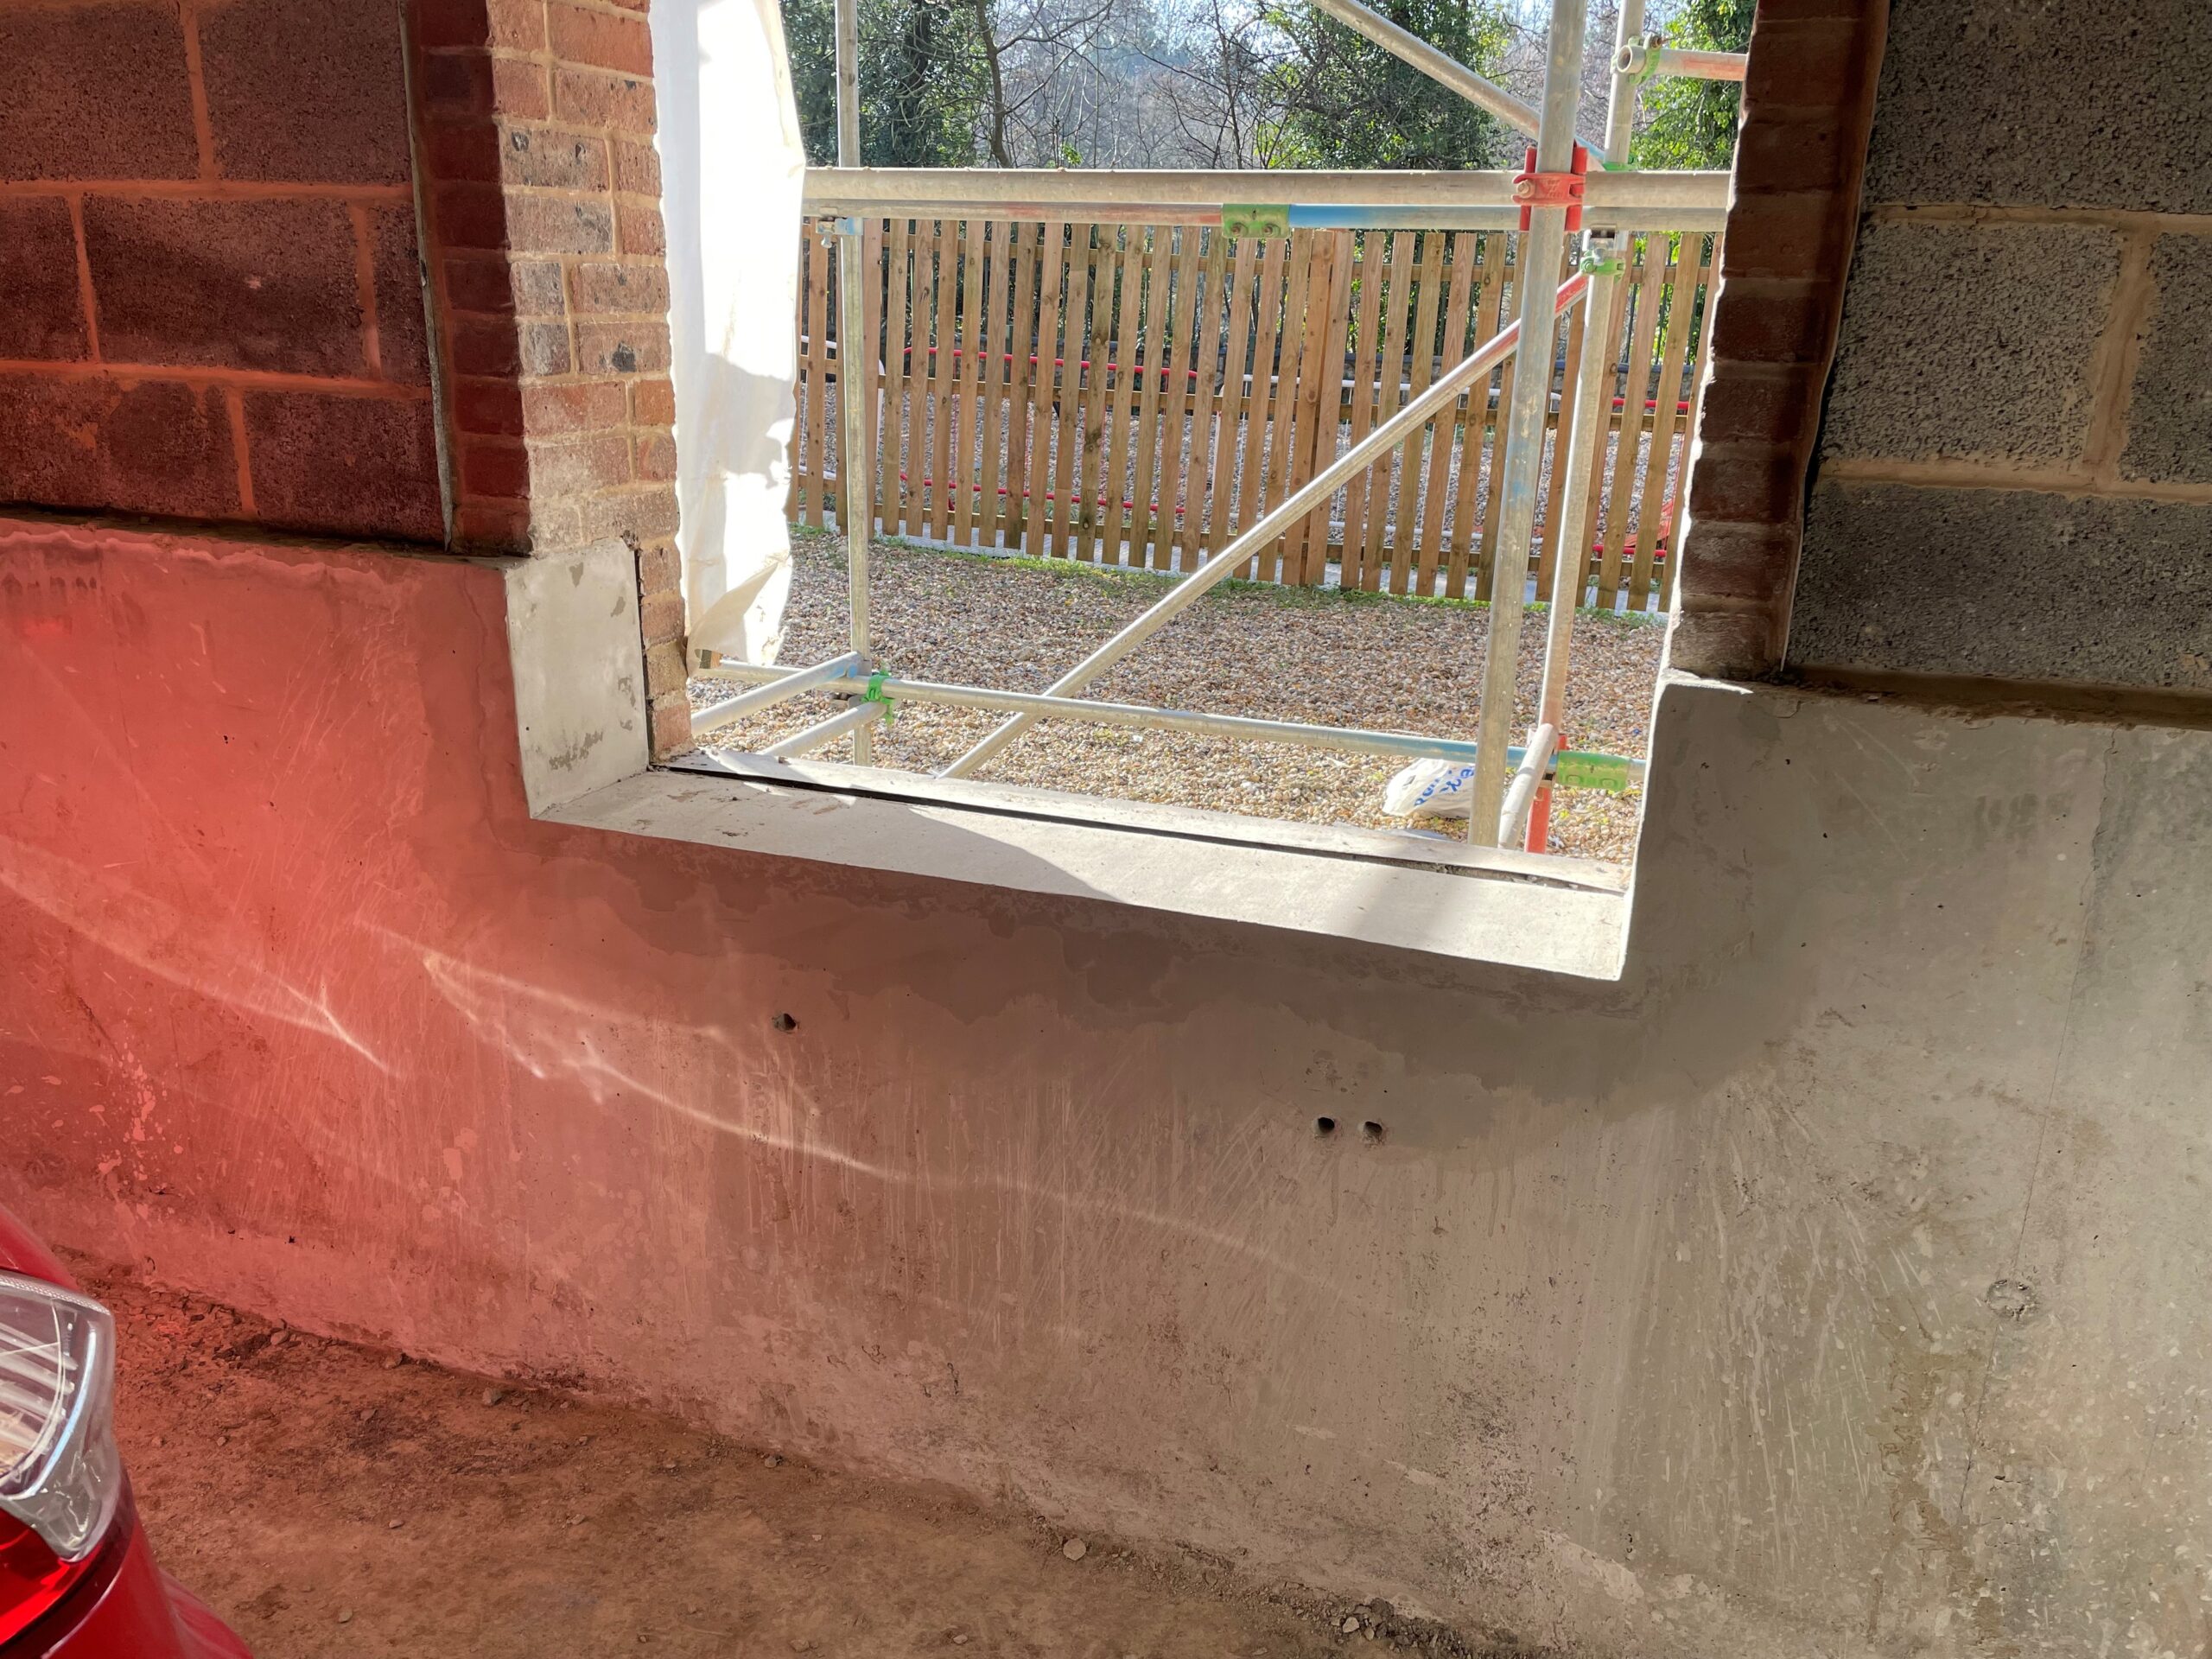 You are currently viewing Enlarging Window Openings – Springfield, Maidstone.